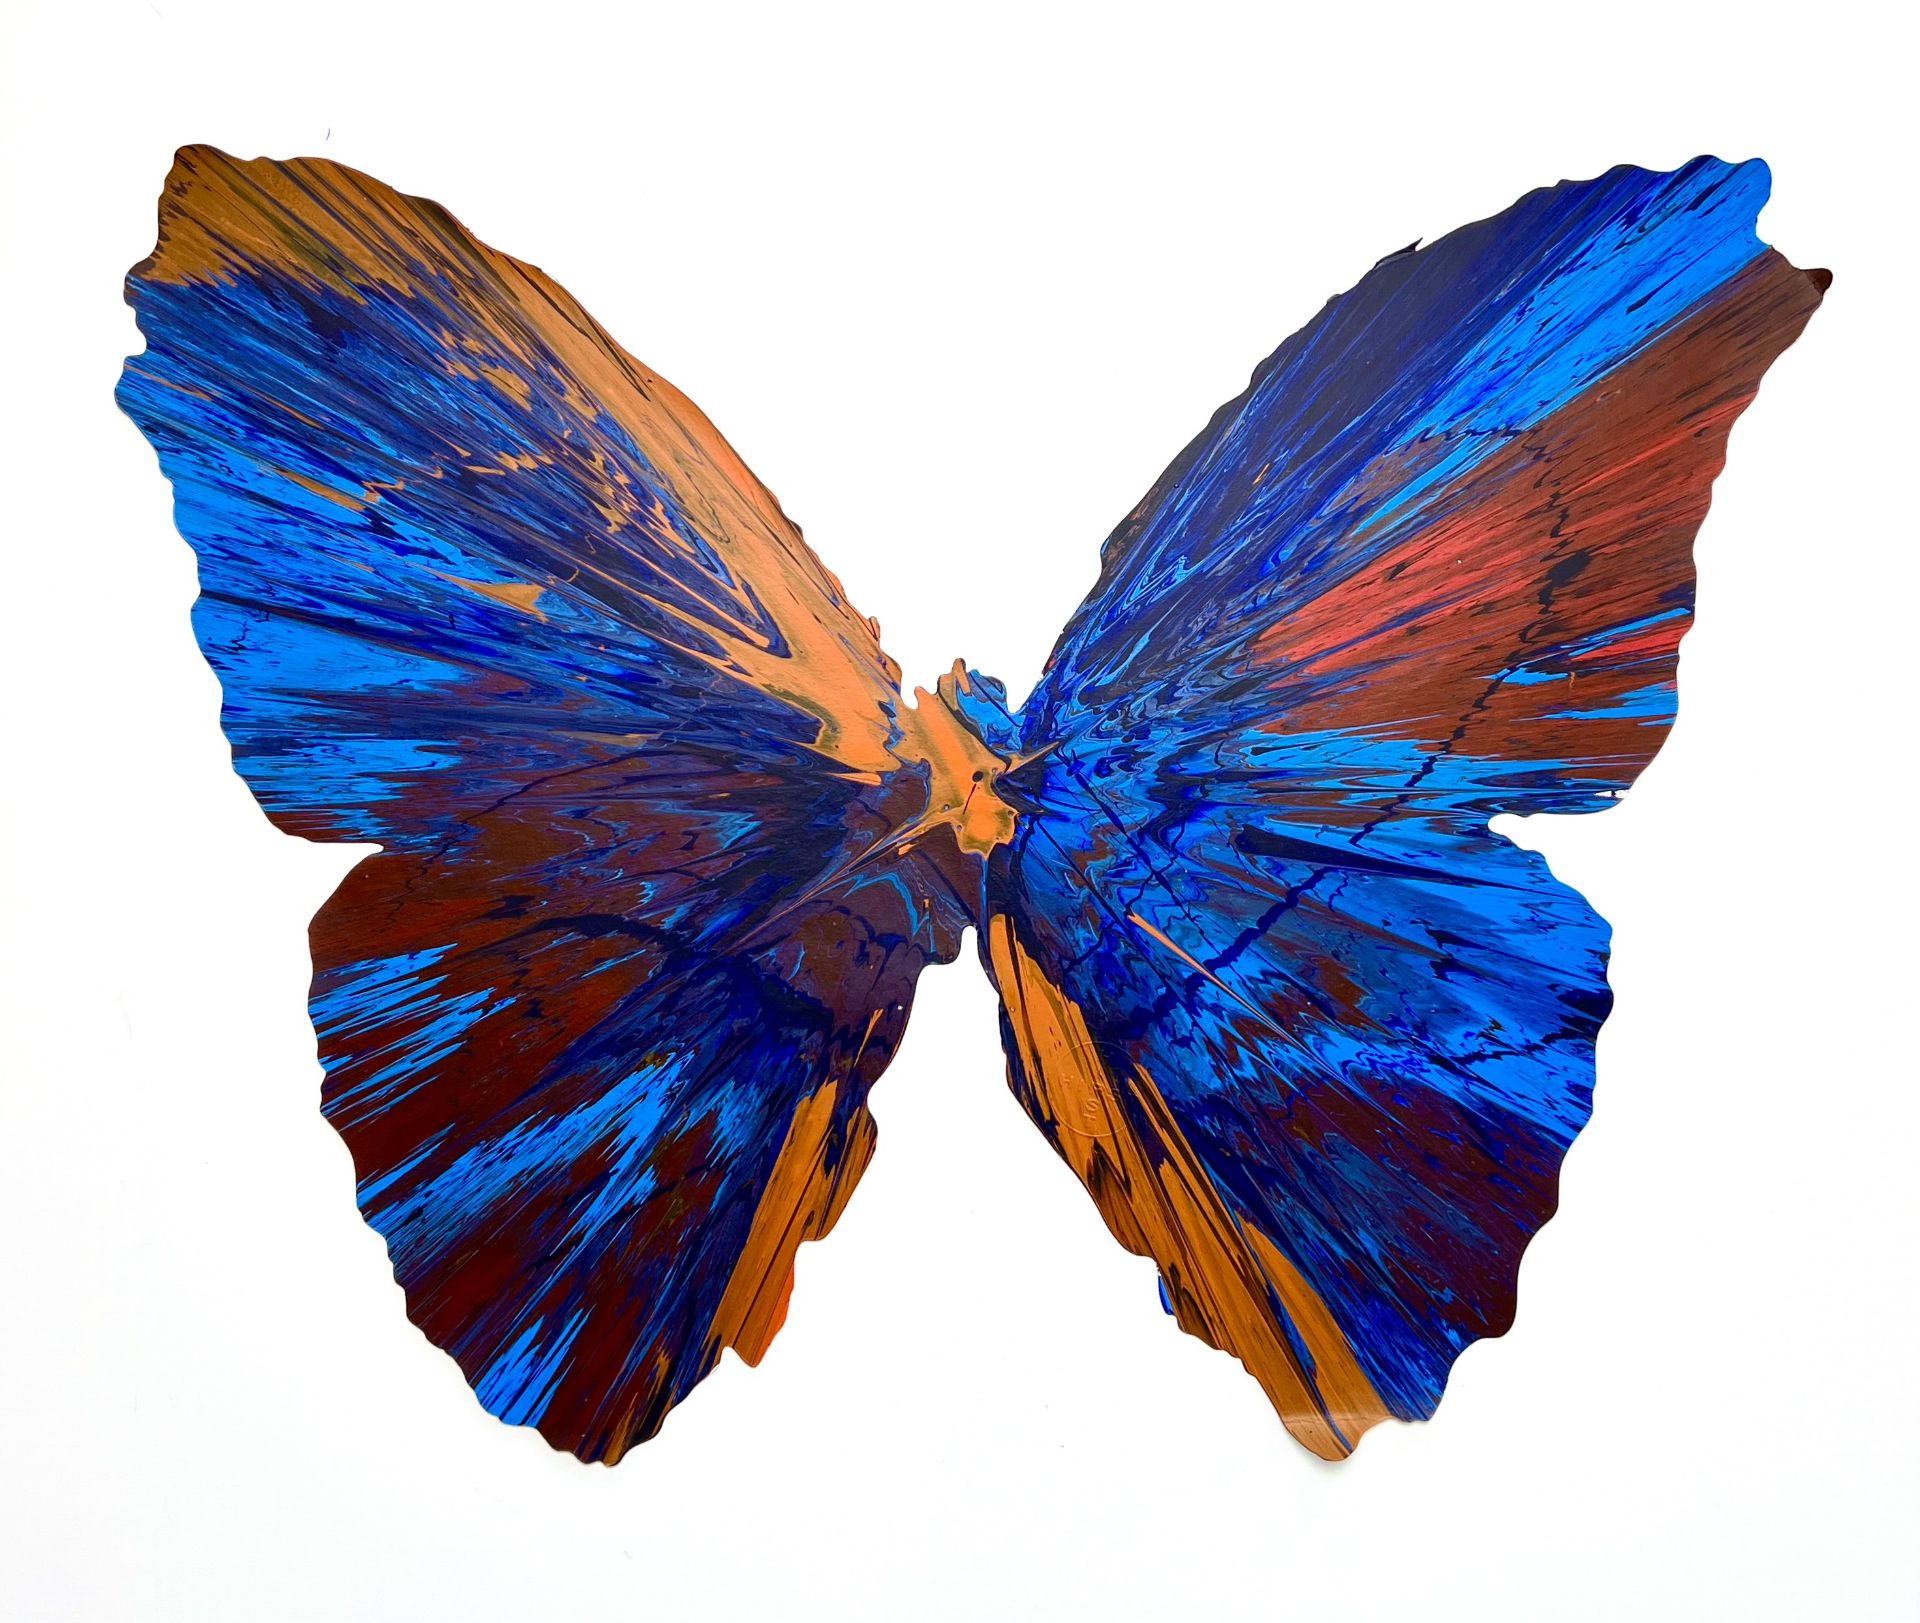 Damien Hirst. 2009. Butterfly. Spin Painting, acrylic on paper. Stamp of the signature "Hirst" on th